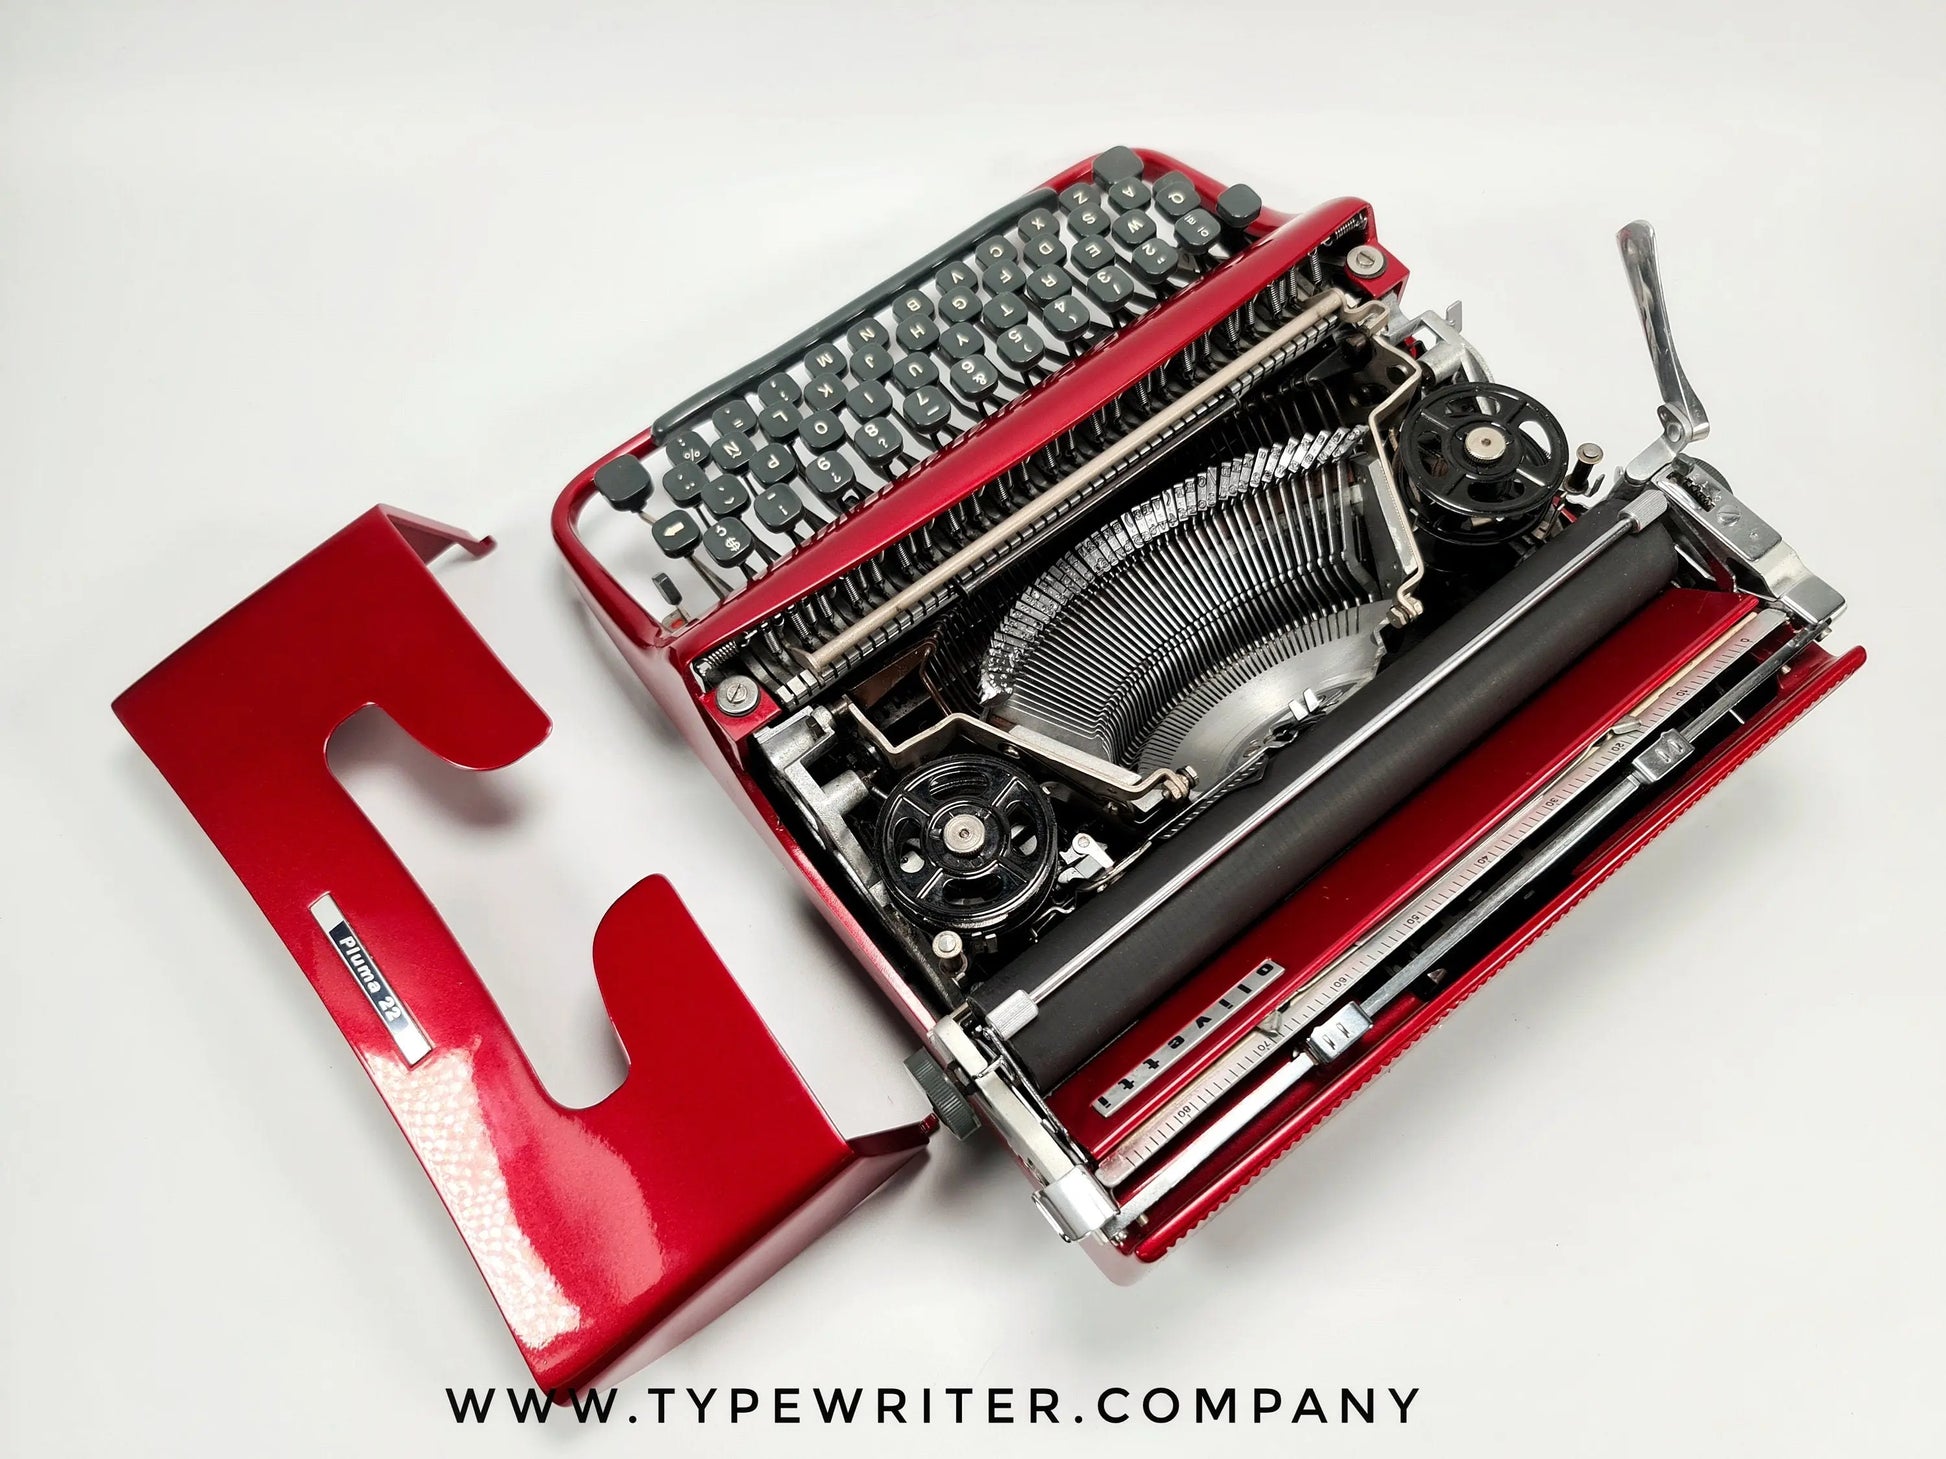 Limited Edition Olivetti Pluma 22 Coral Red, Vintage, Mint Condition, Manual Portable, Professionally Serviced by Typewriter.Company - ElGranero Typewriter.Company